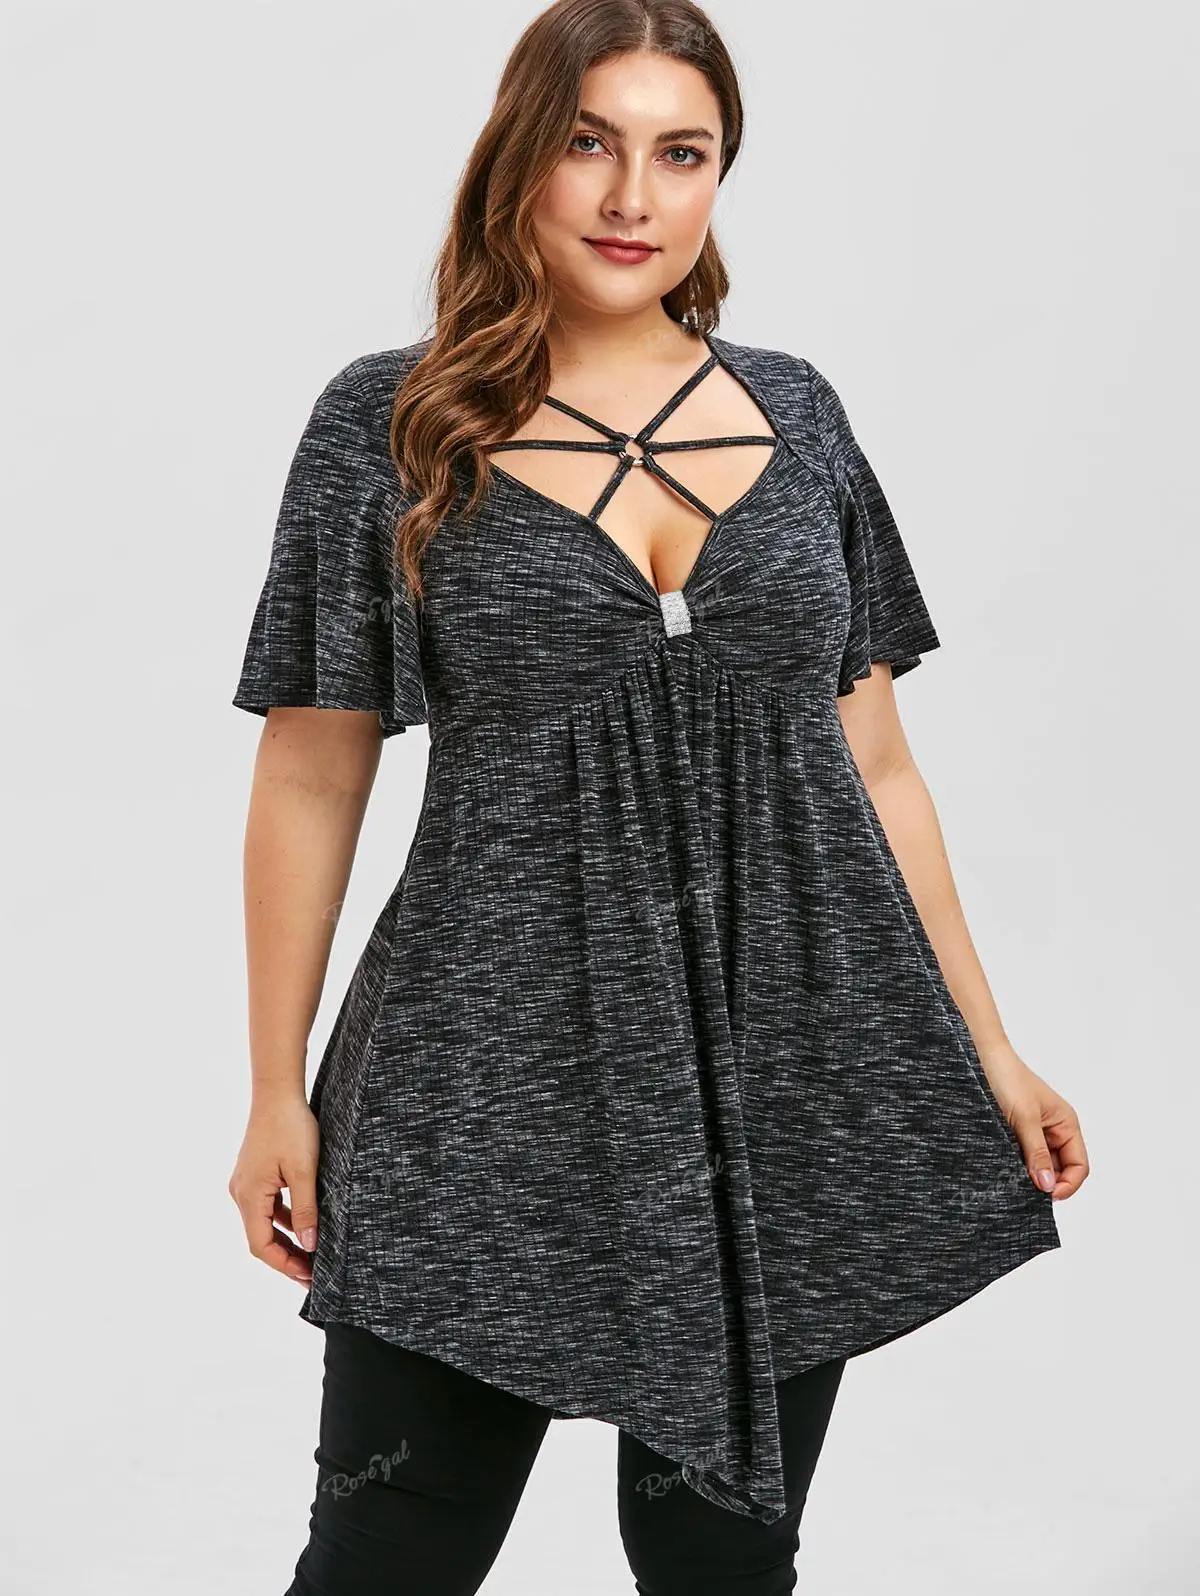 

ROSEGAL Plus Size O-Ring Stripes Buckle T-shirt Women V-Neck Handkerchief Marled Short Sleeves Tees Gray Casual Tops